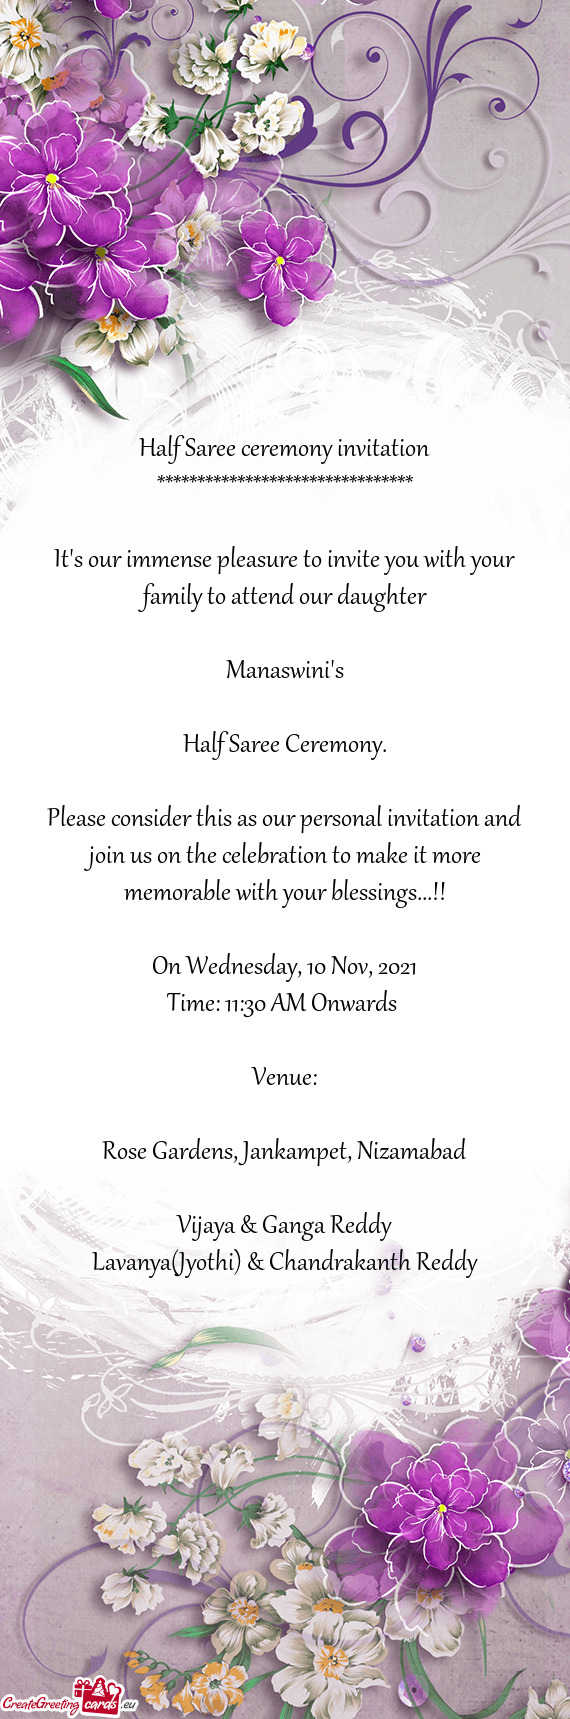 Please consider this as our personal invitation and join us on the celebration to make it more memor